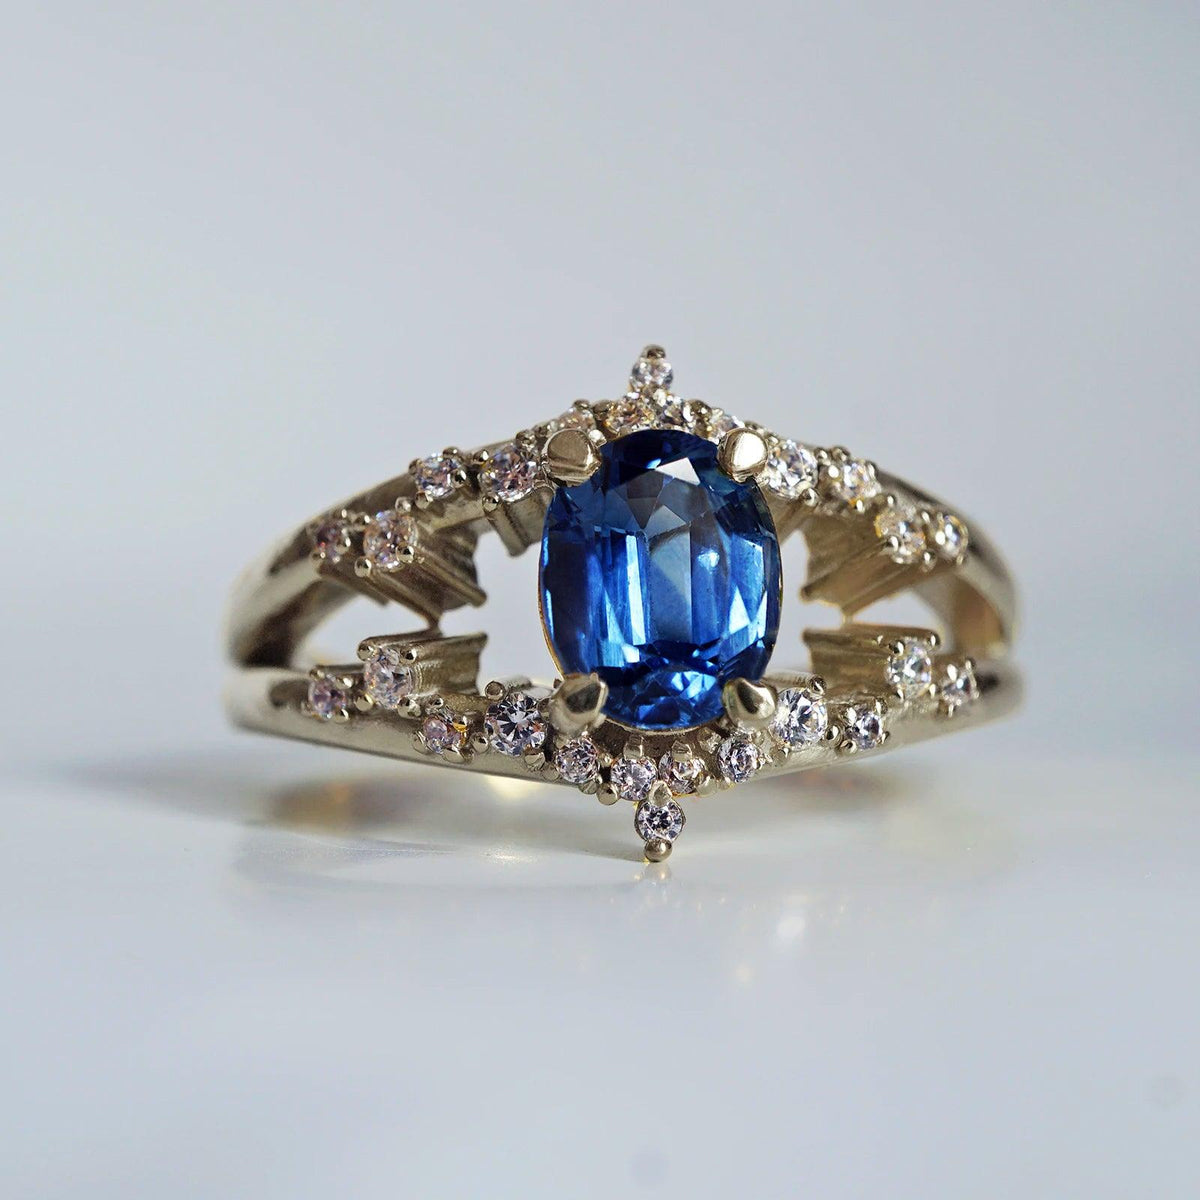 Celestial Blue Sapphire Diamond Ring in 14K and 18K Gold - Tippy Taste Jewelry